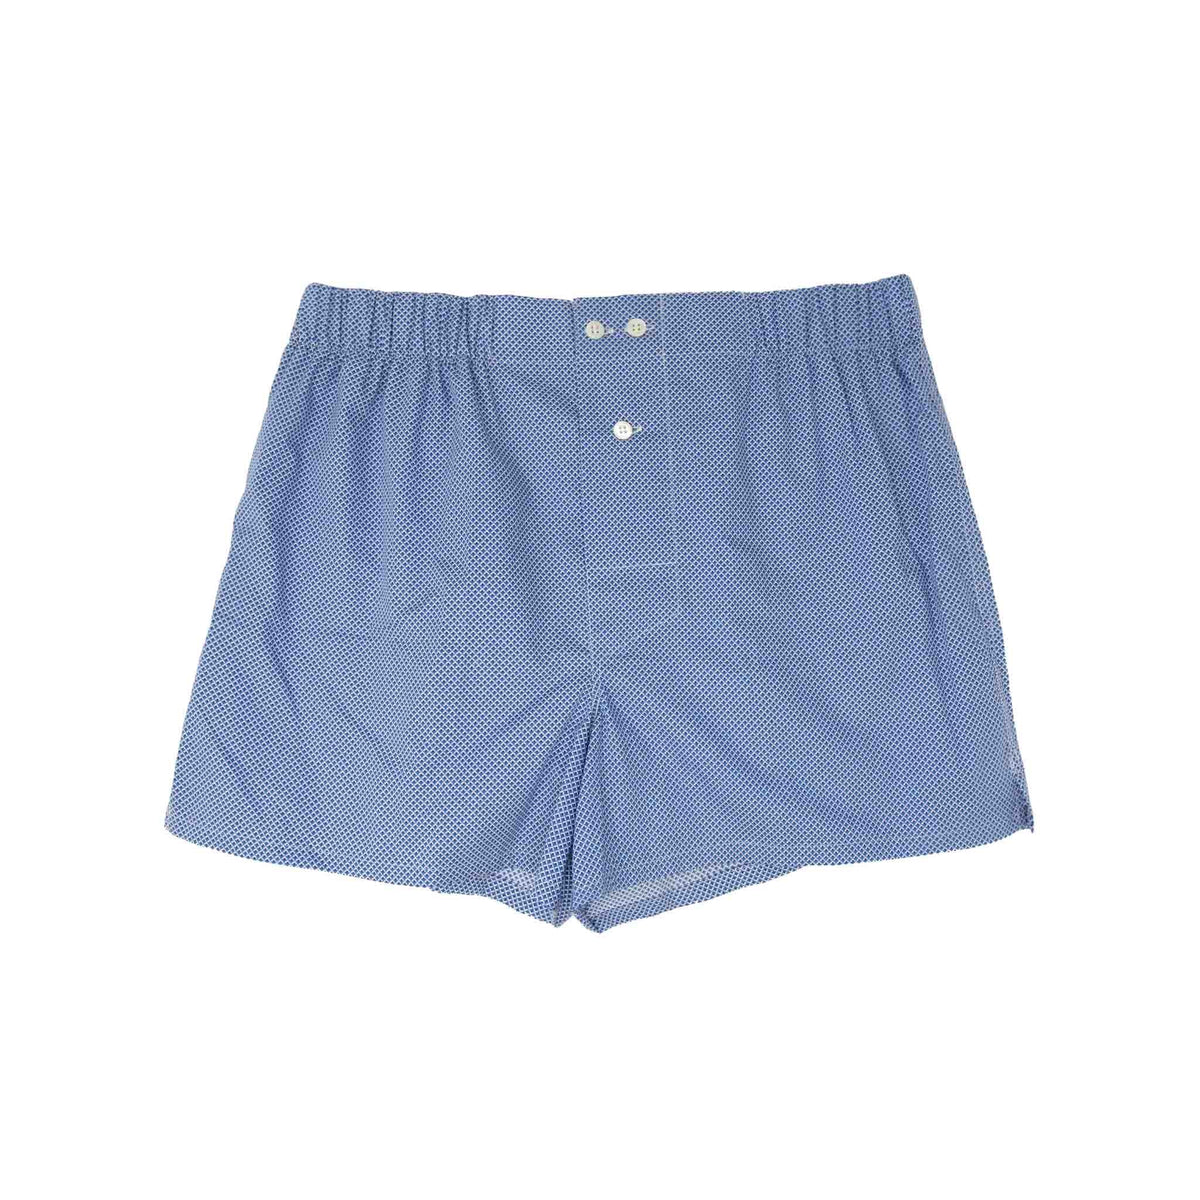 blue-with-small-geomoetric-pattern-cotton-boxers